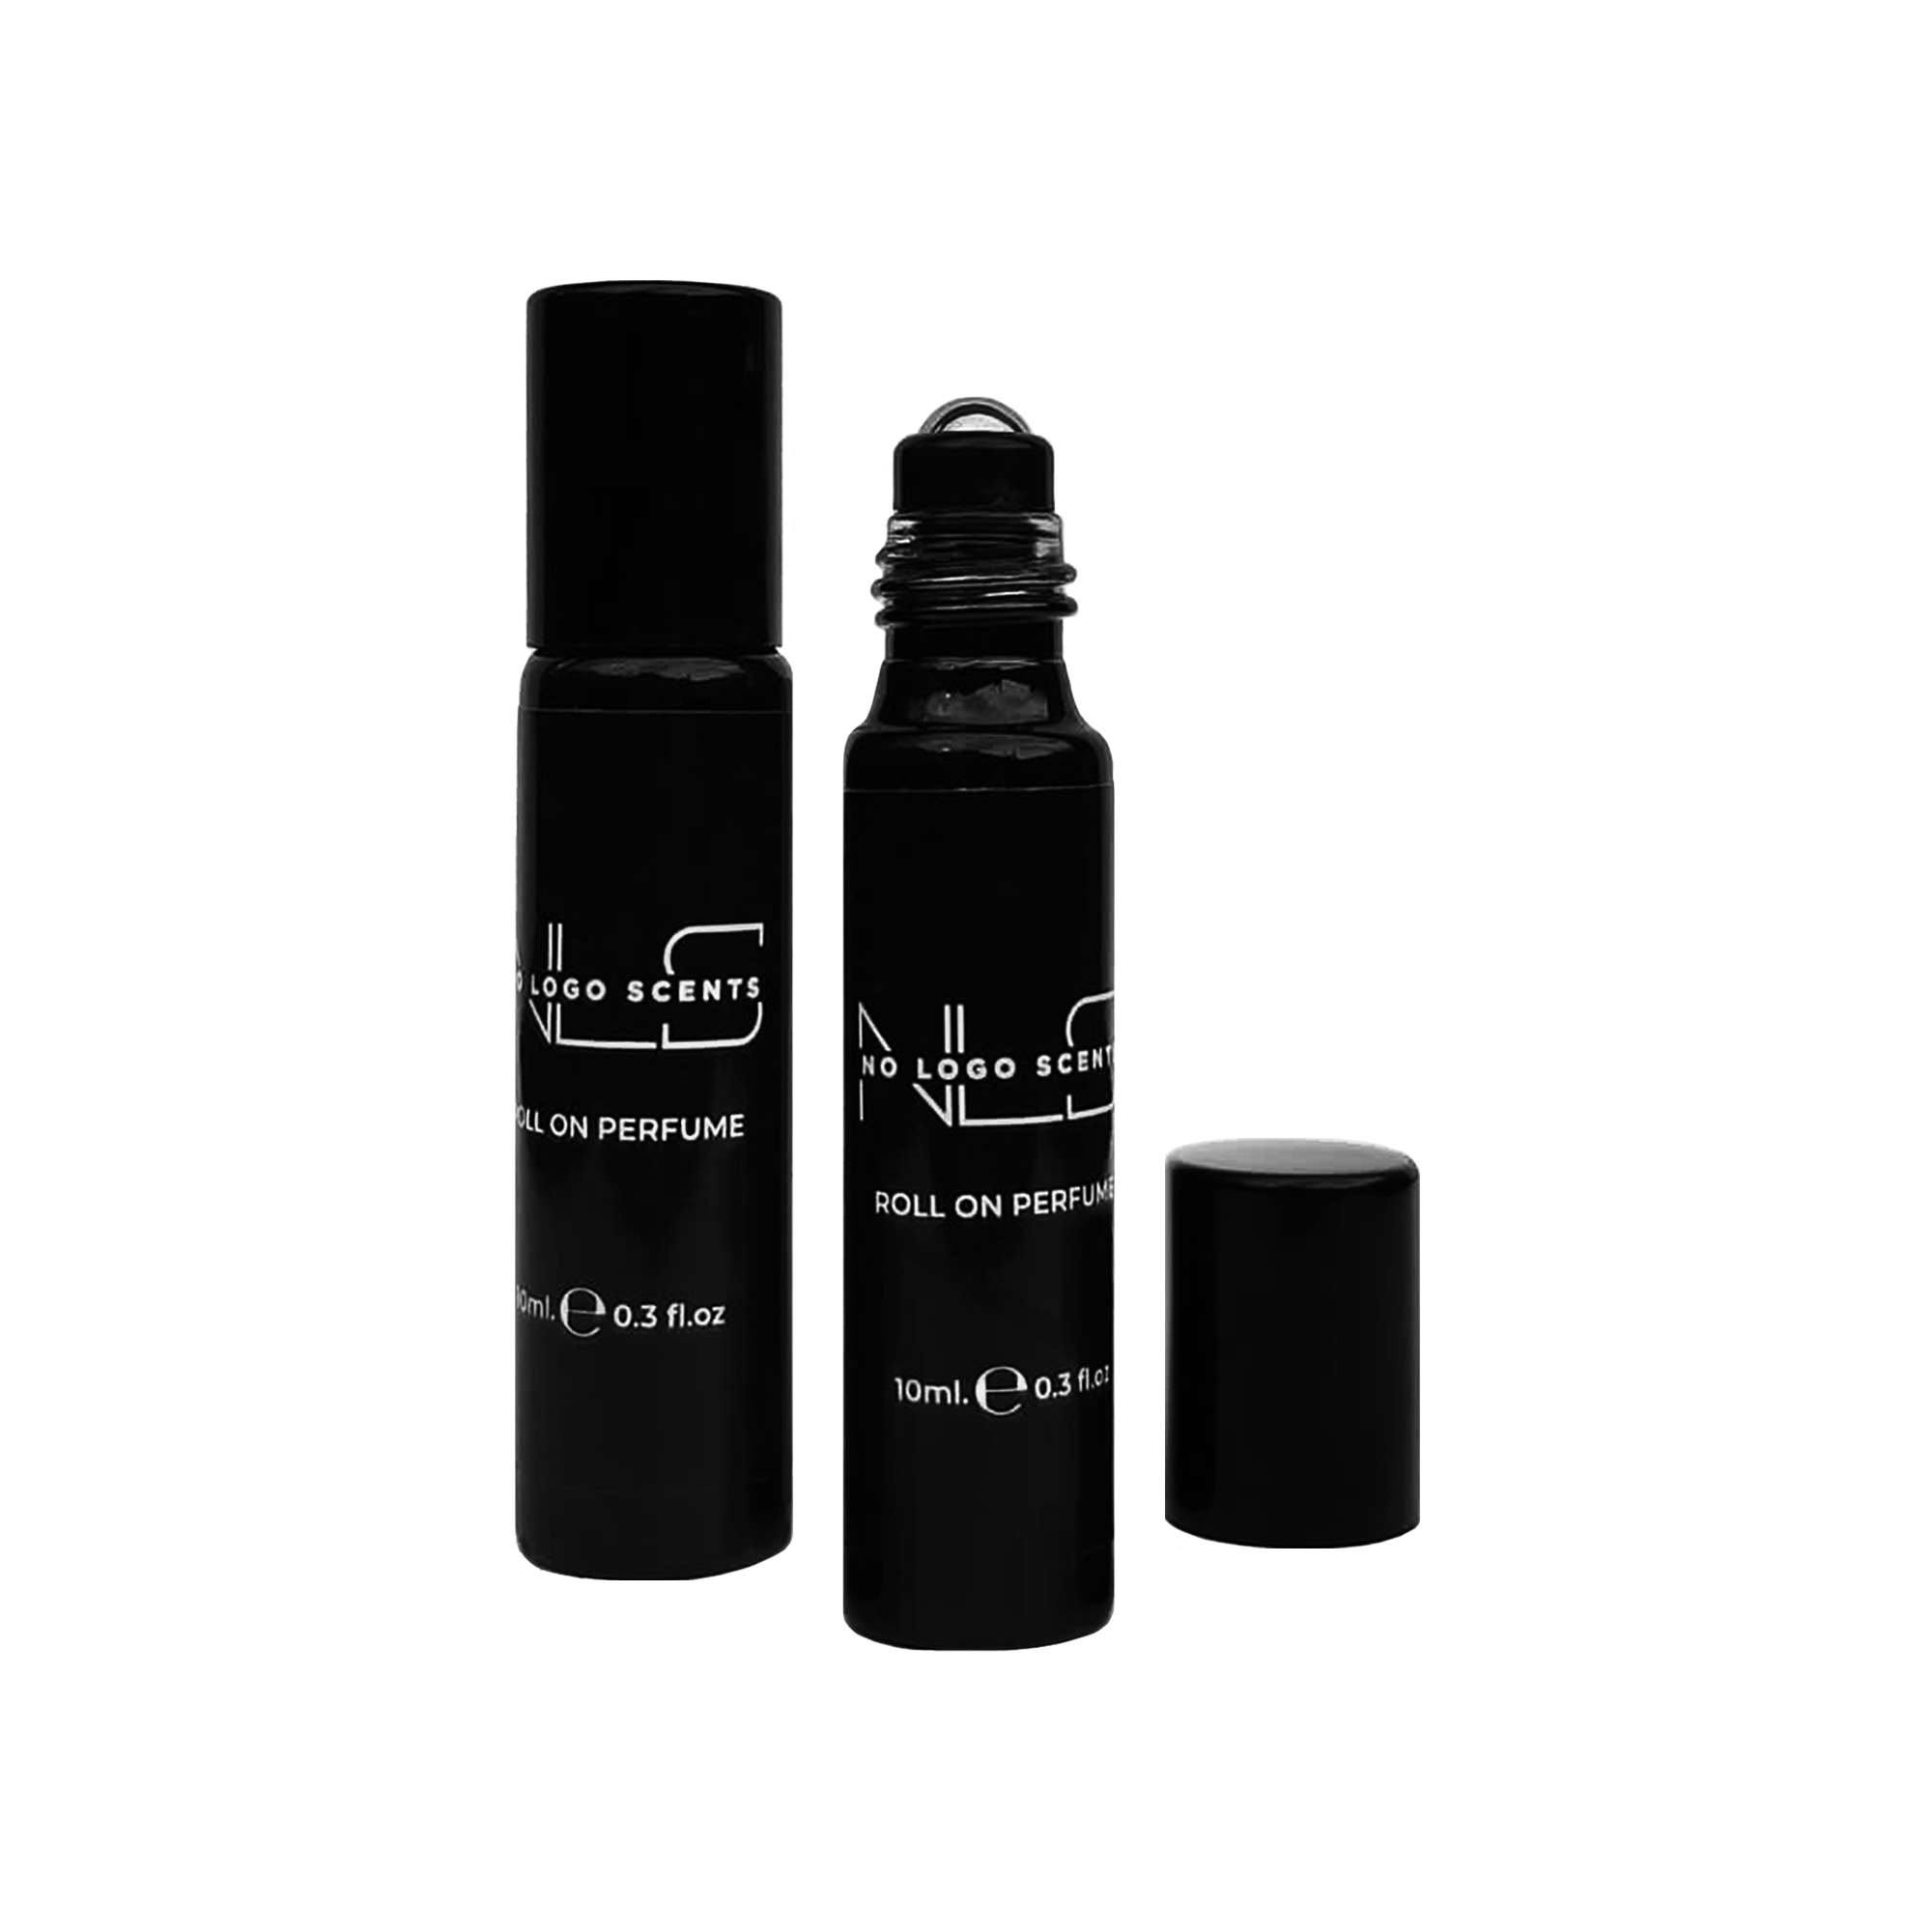 No.109 – INSPIRED BY BLACK POMEGRANATE from category UNISEX ROLL ON PERFUMES - 3